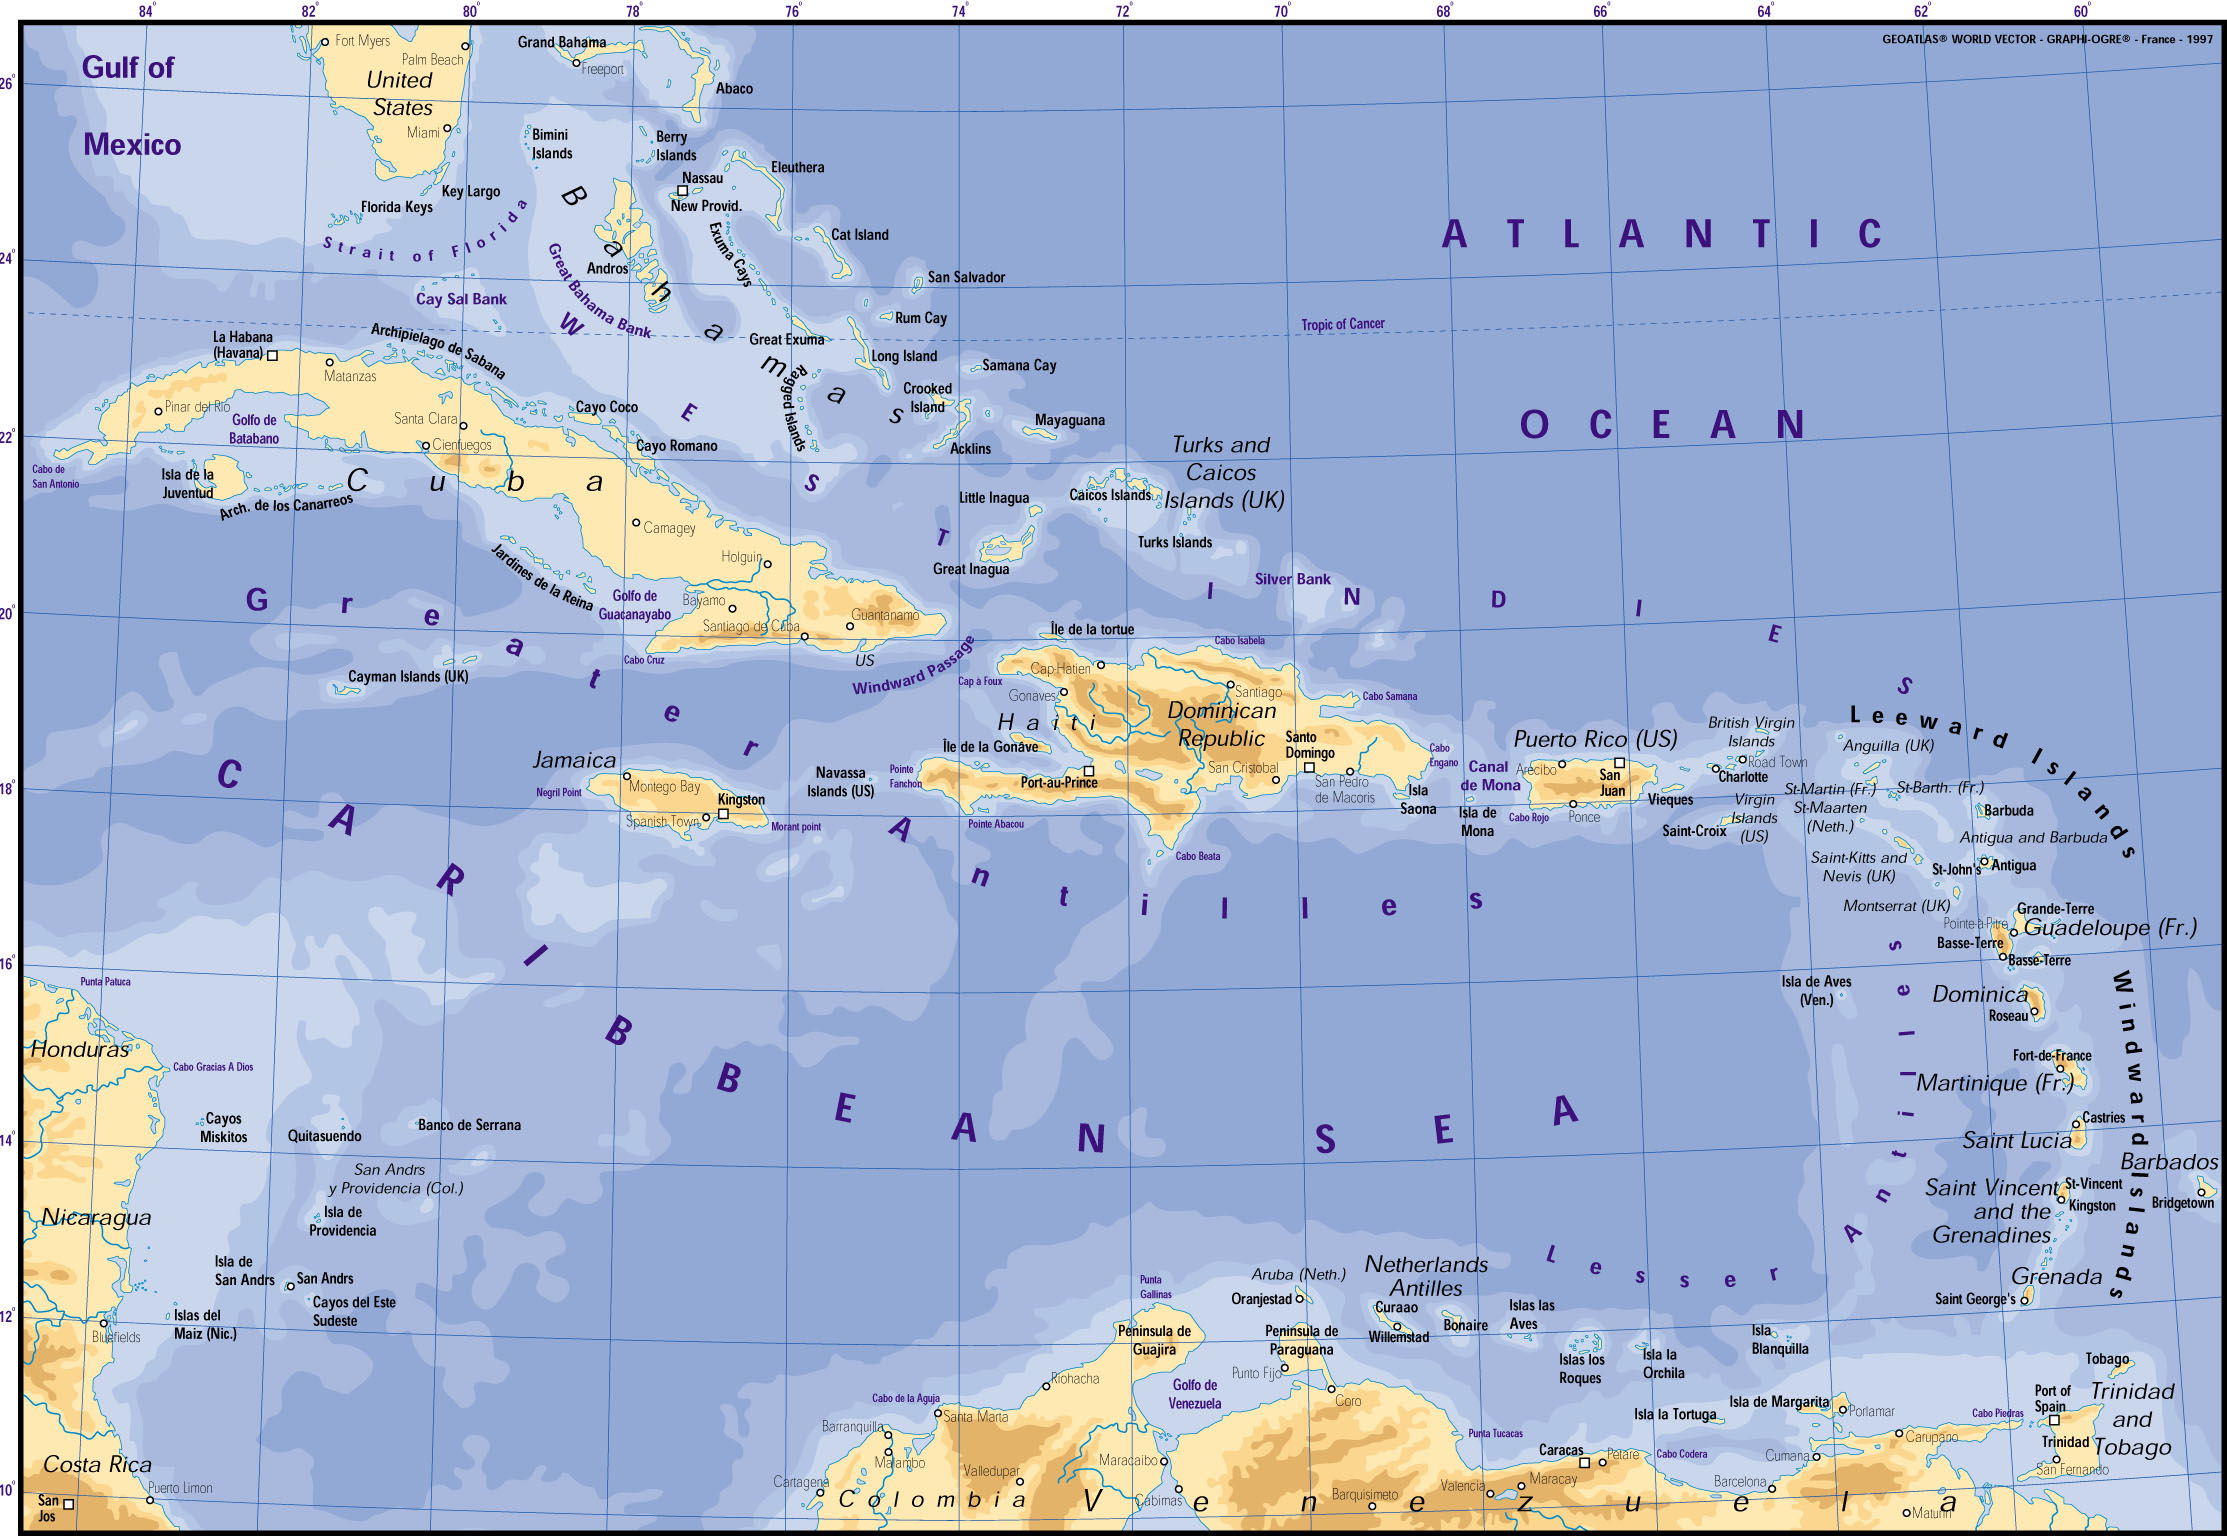 24103717 7 saint kitts and nevis map